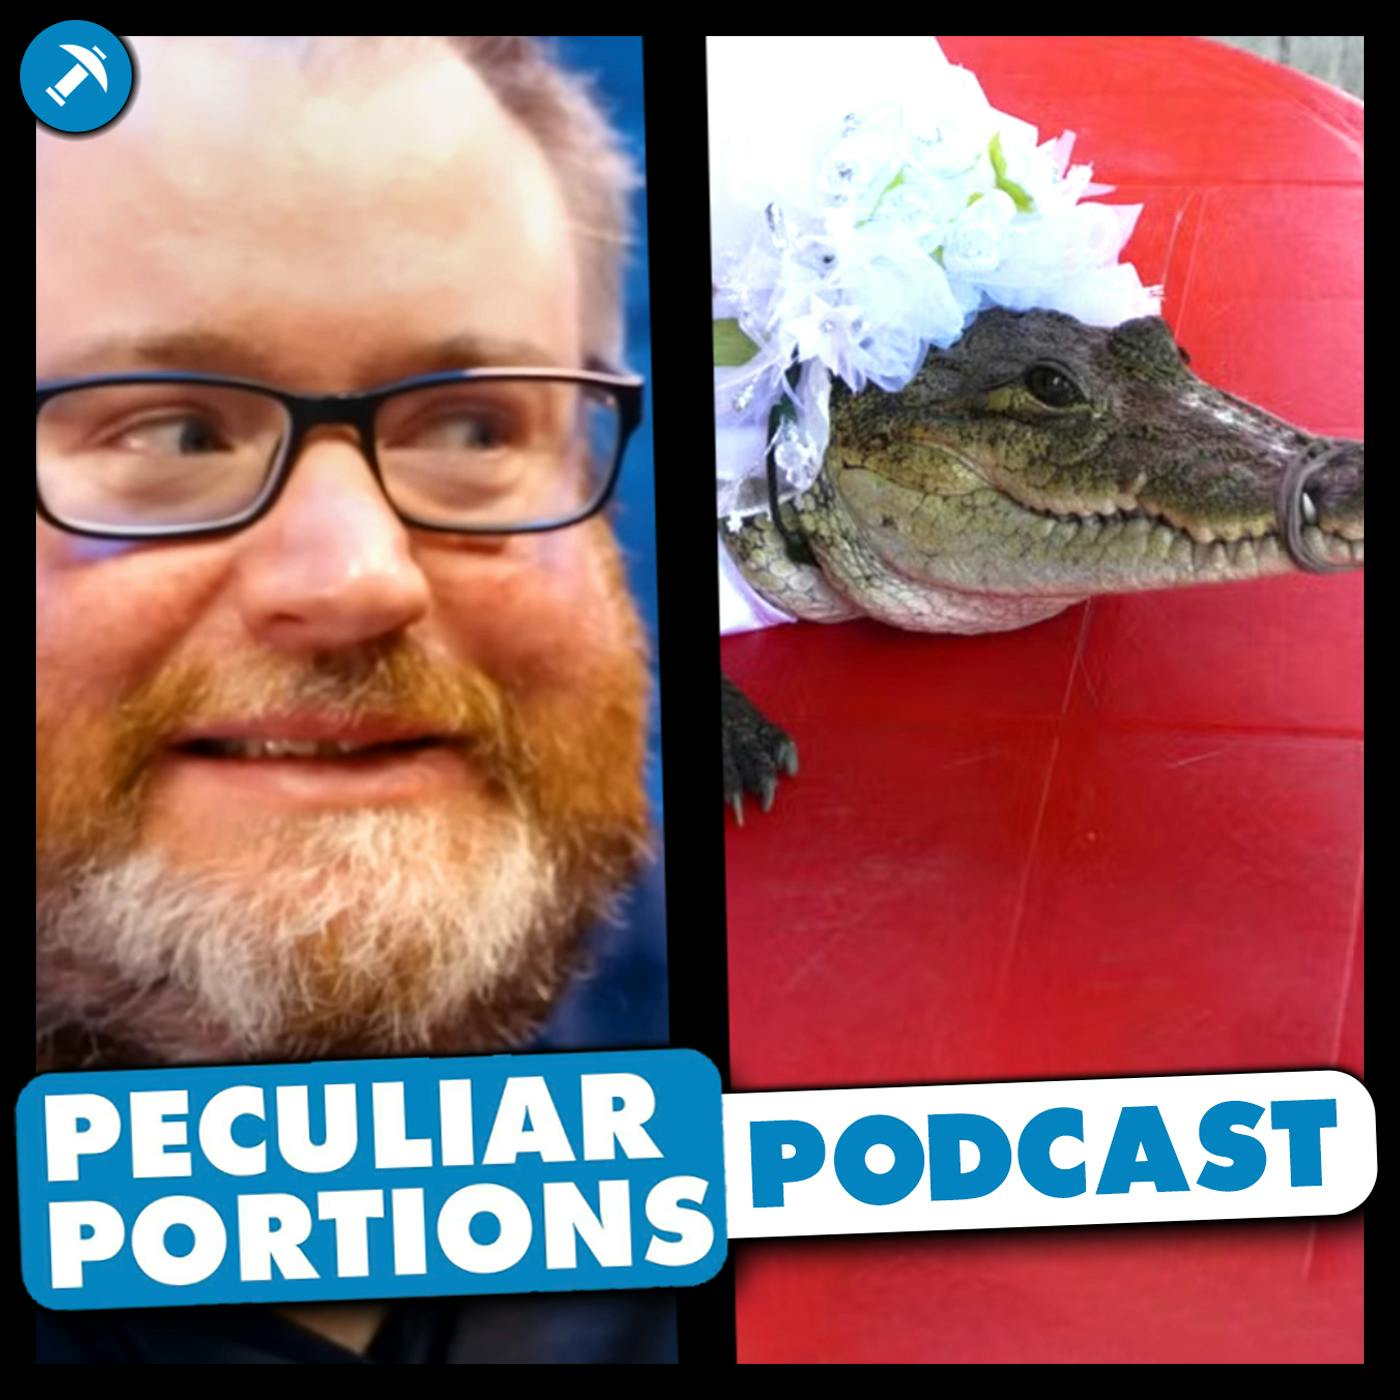 Mexican mayor marries alligator - Peculiar Portions Podcast #64